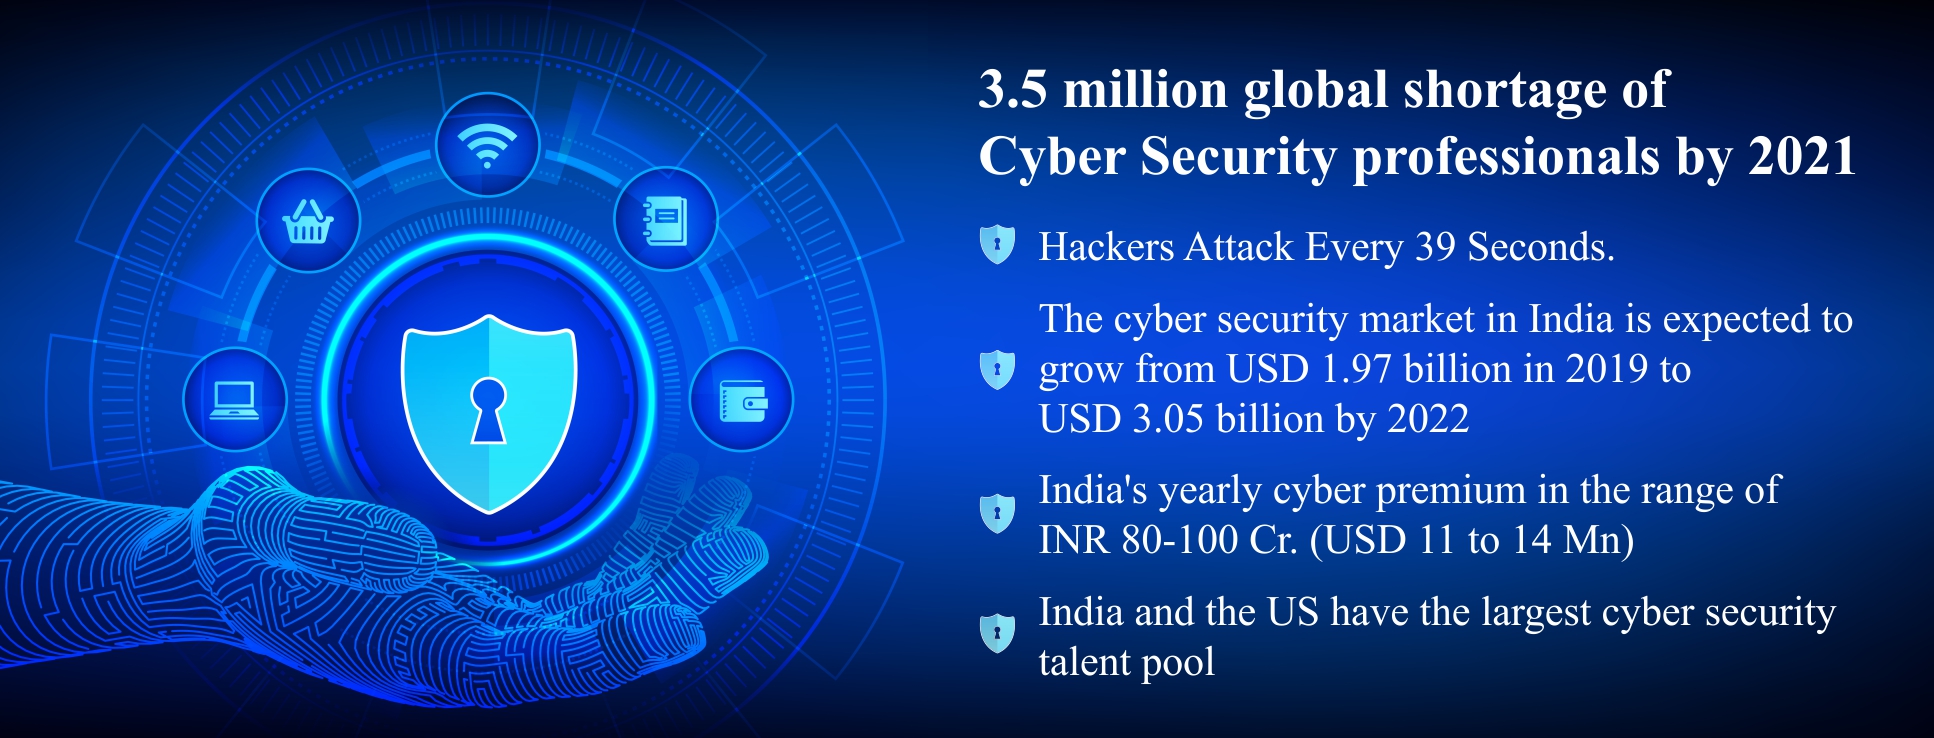 Cyber Security VIT Bhopal  - Best University in Central India -  New-Website-content43-1